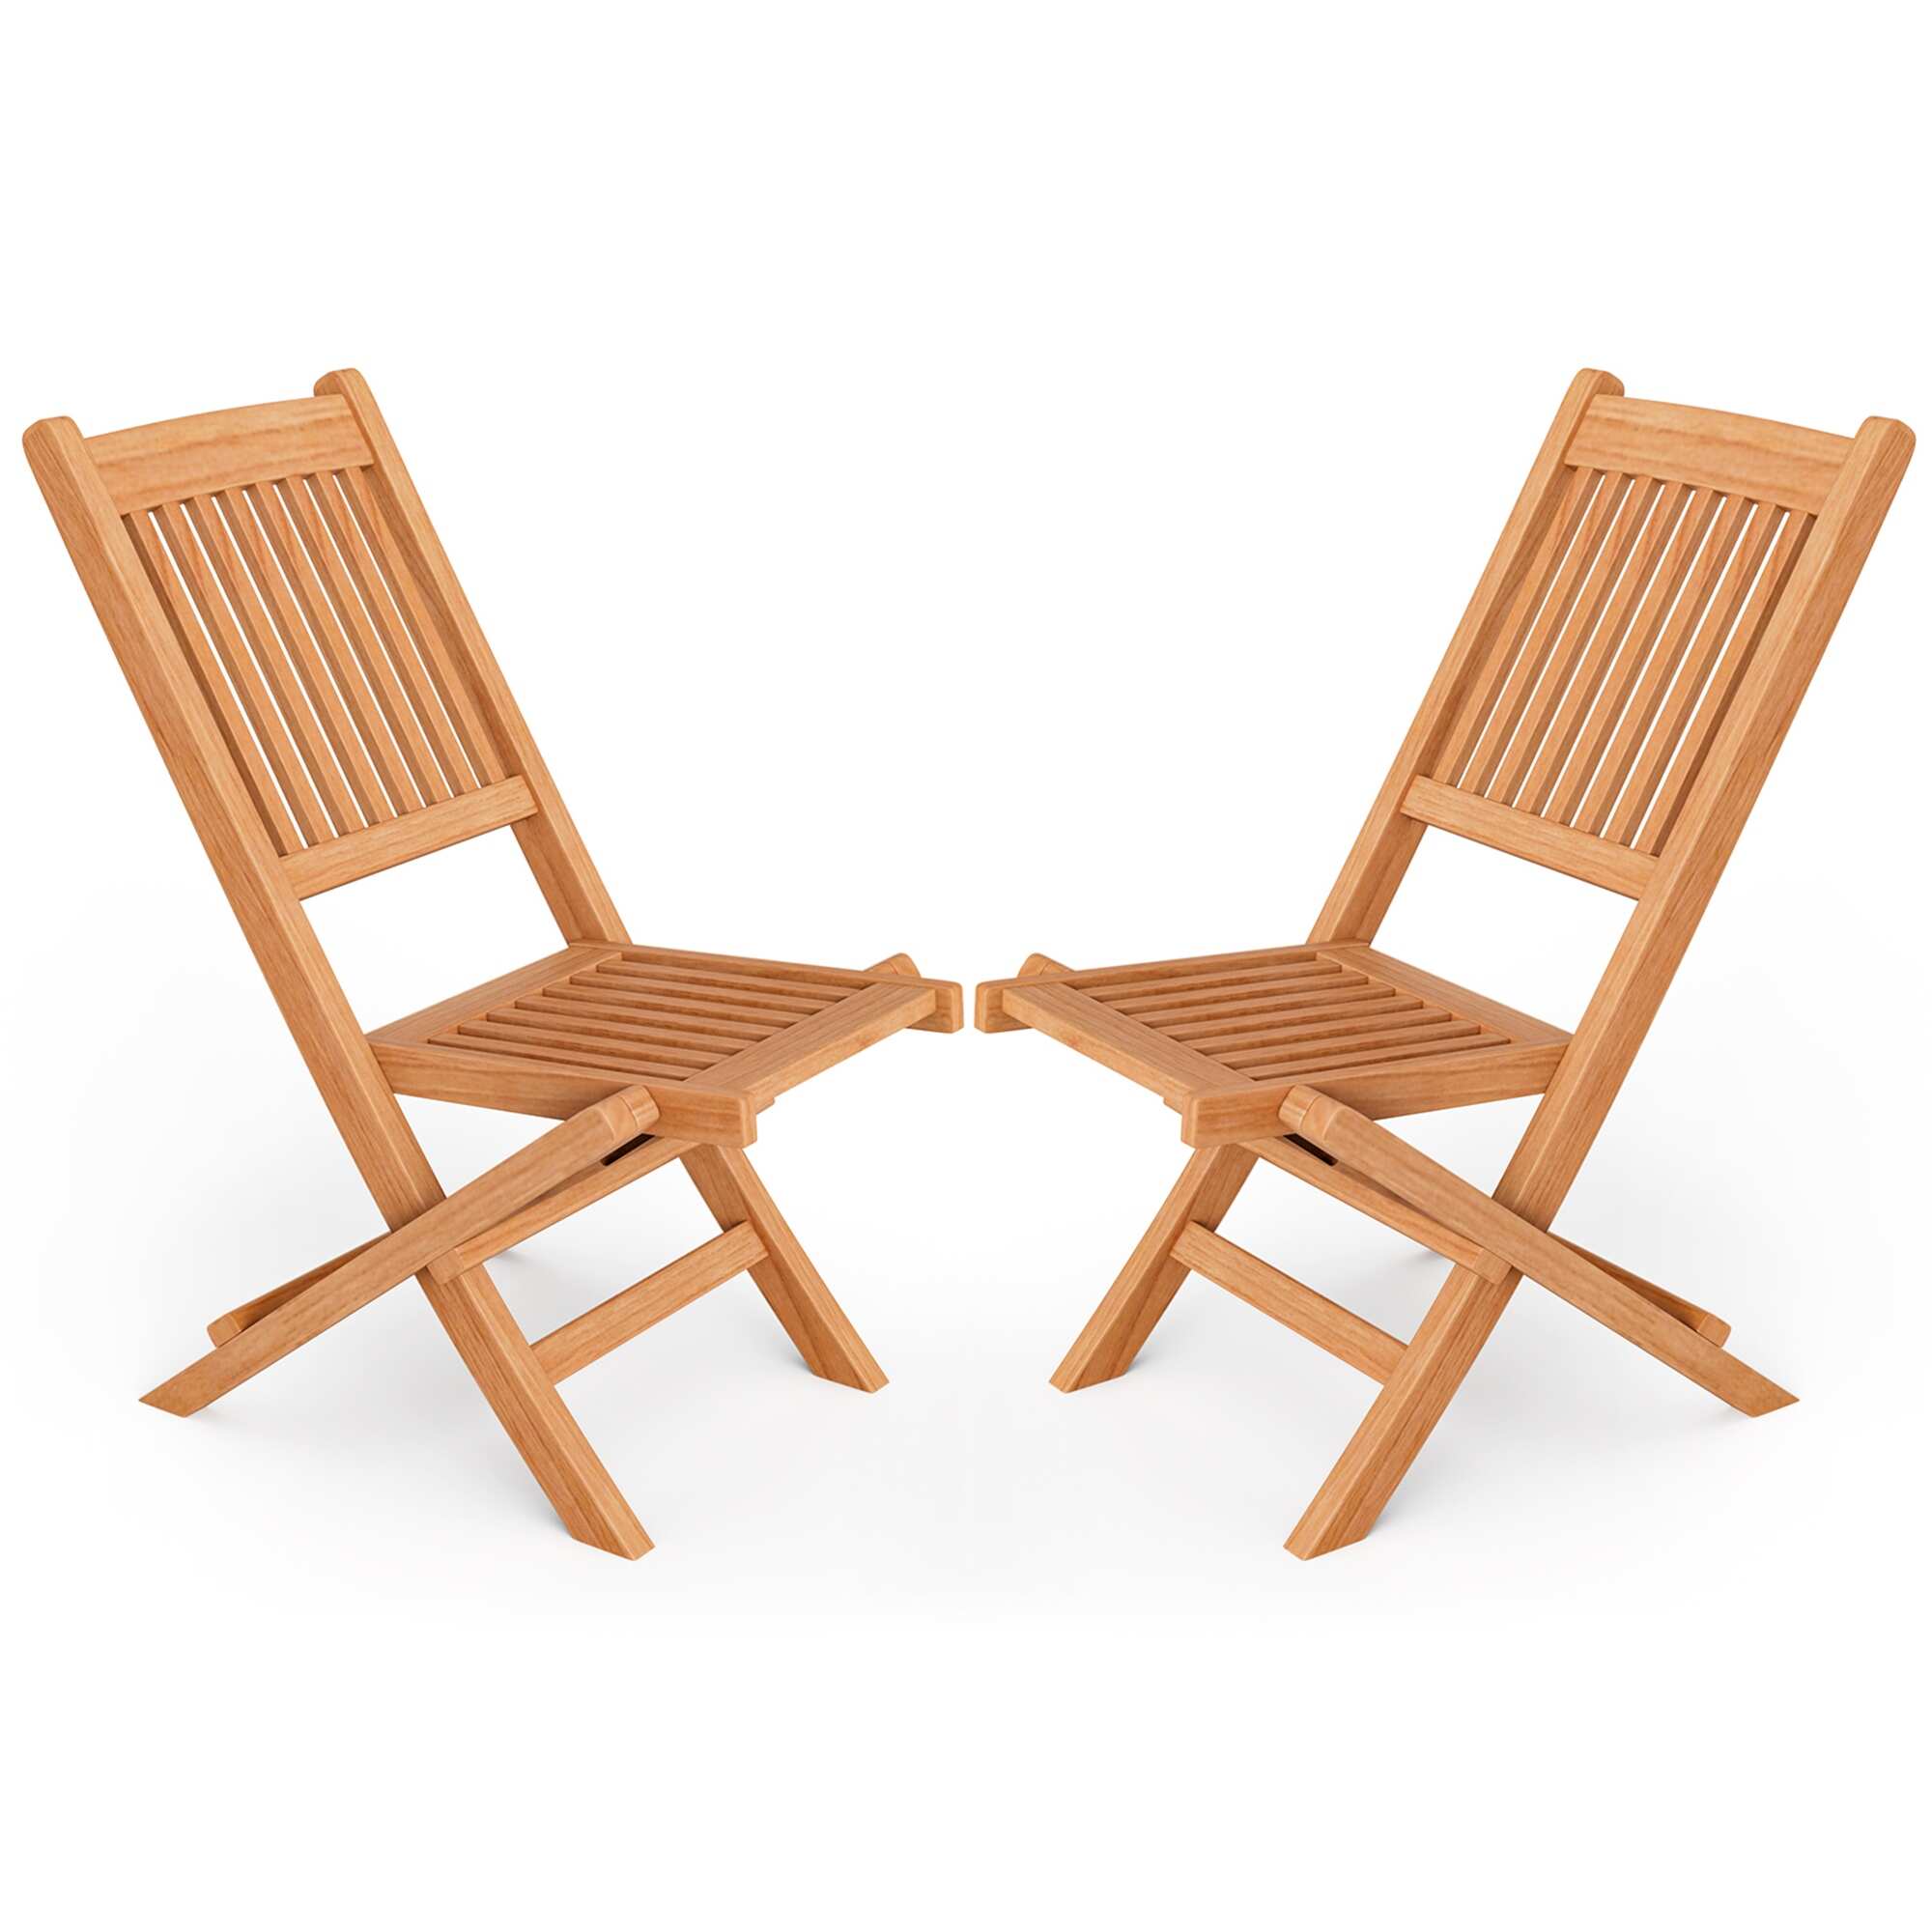 Gymax Set of 2 Teak Wood Outdoor Chair Folding Portable Patio Chair w/